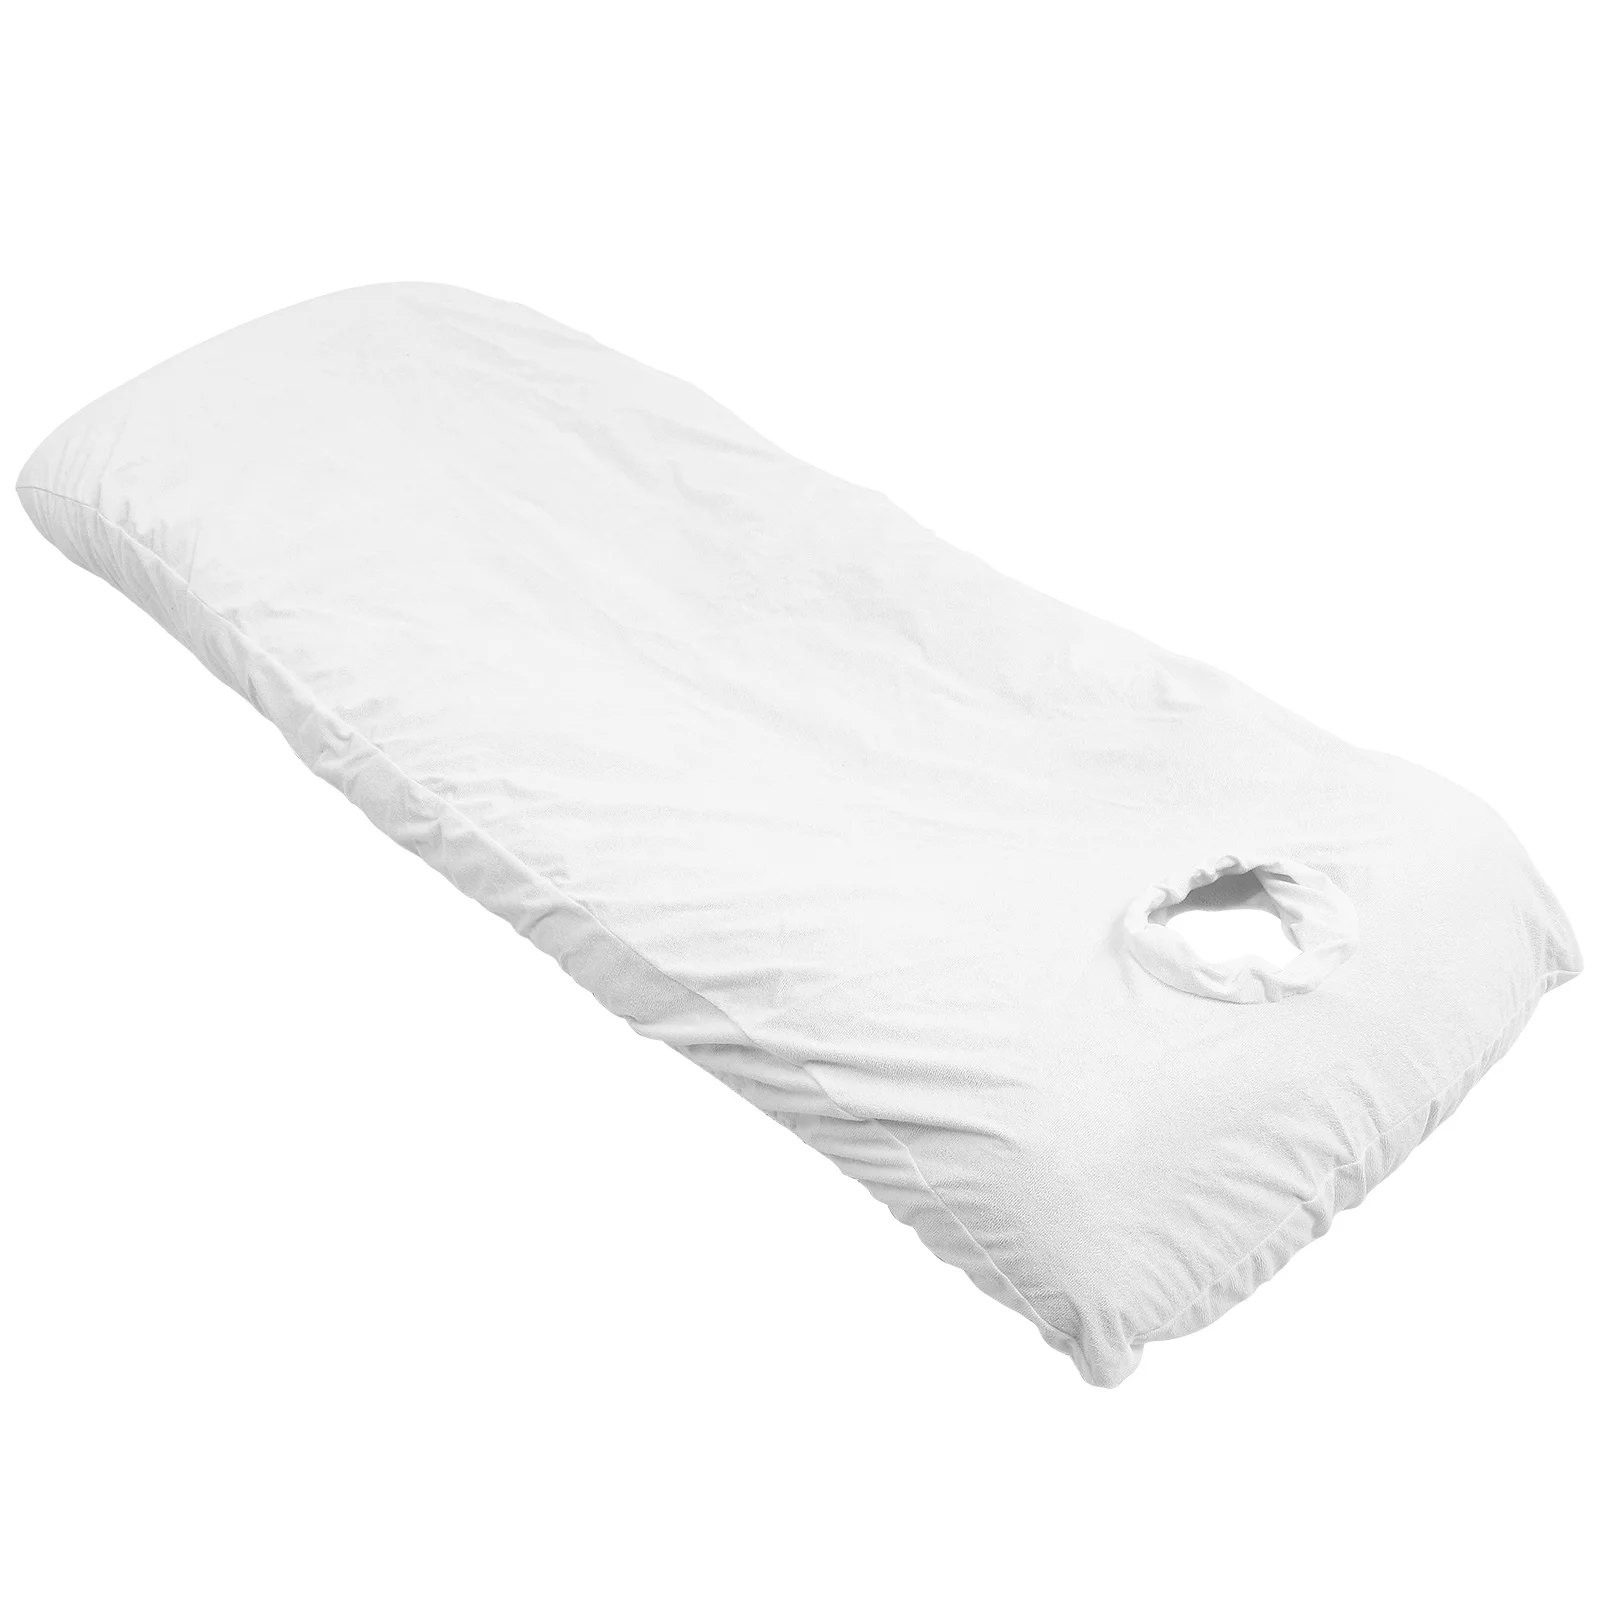 

Beauty Massage Bed Cover Accessory Wear-resistant Table Skirt Supple Salon Disposable Bib Sheet